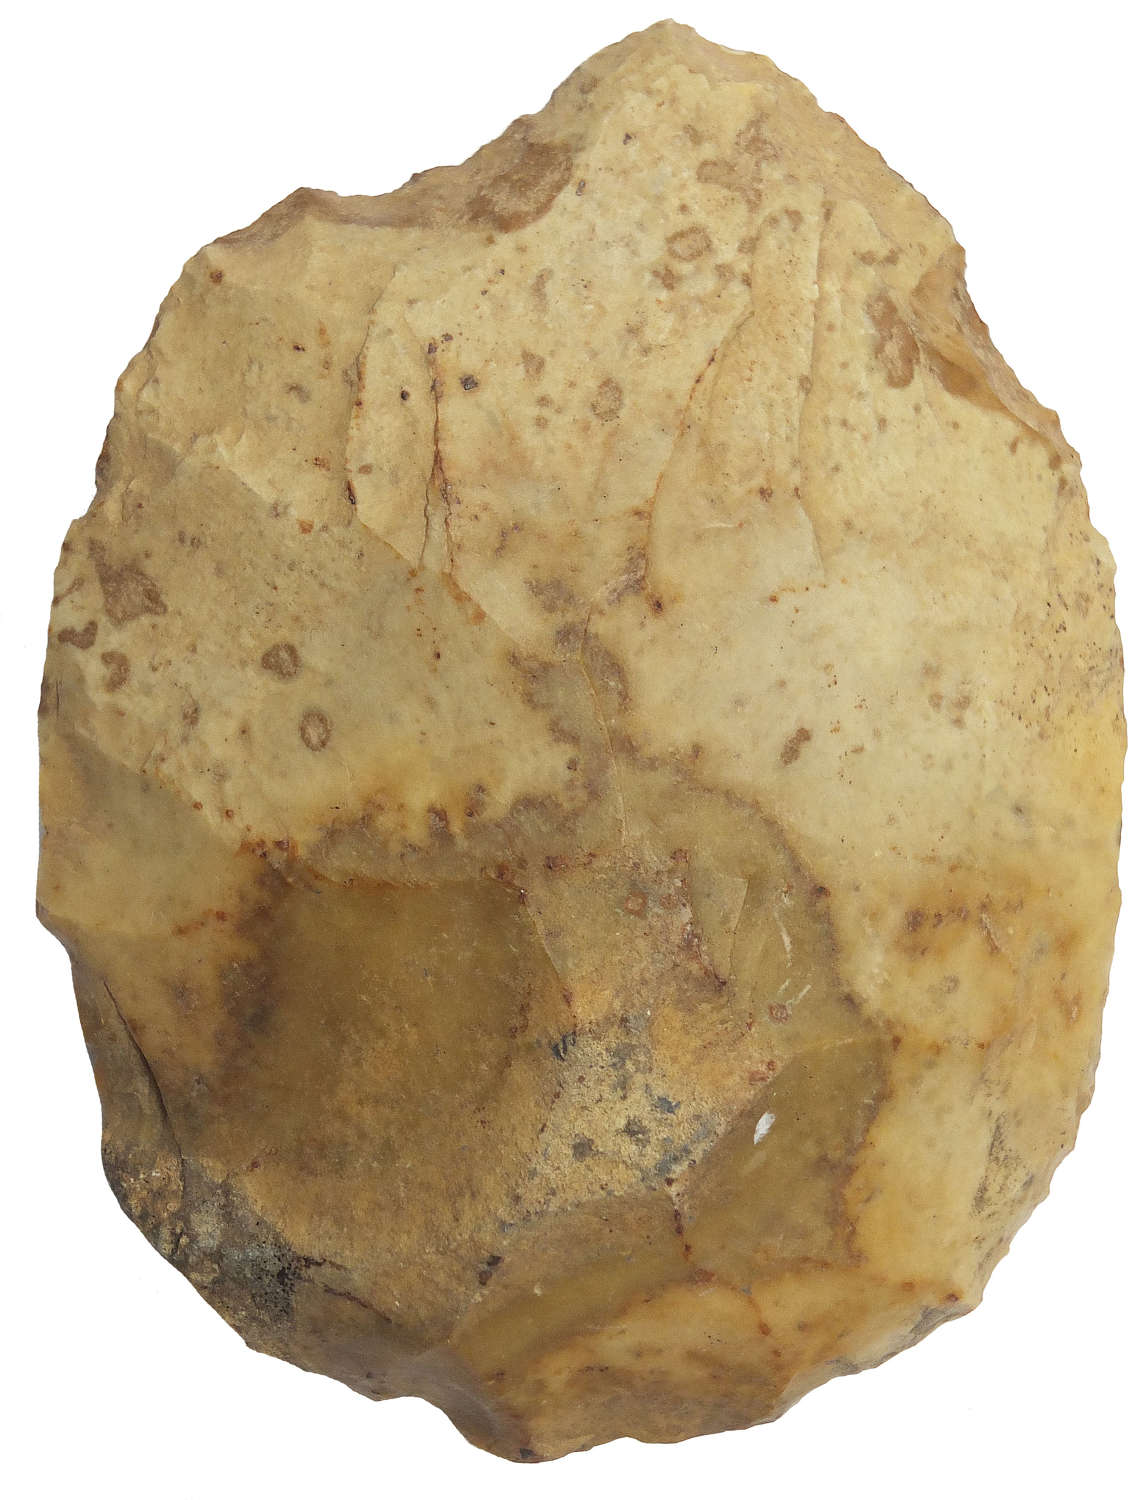 A Middle Palaeolithic Mousterian ovate handaxe from the Dordogne